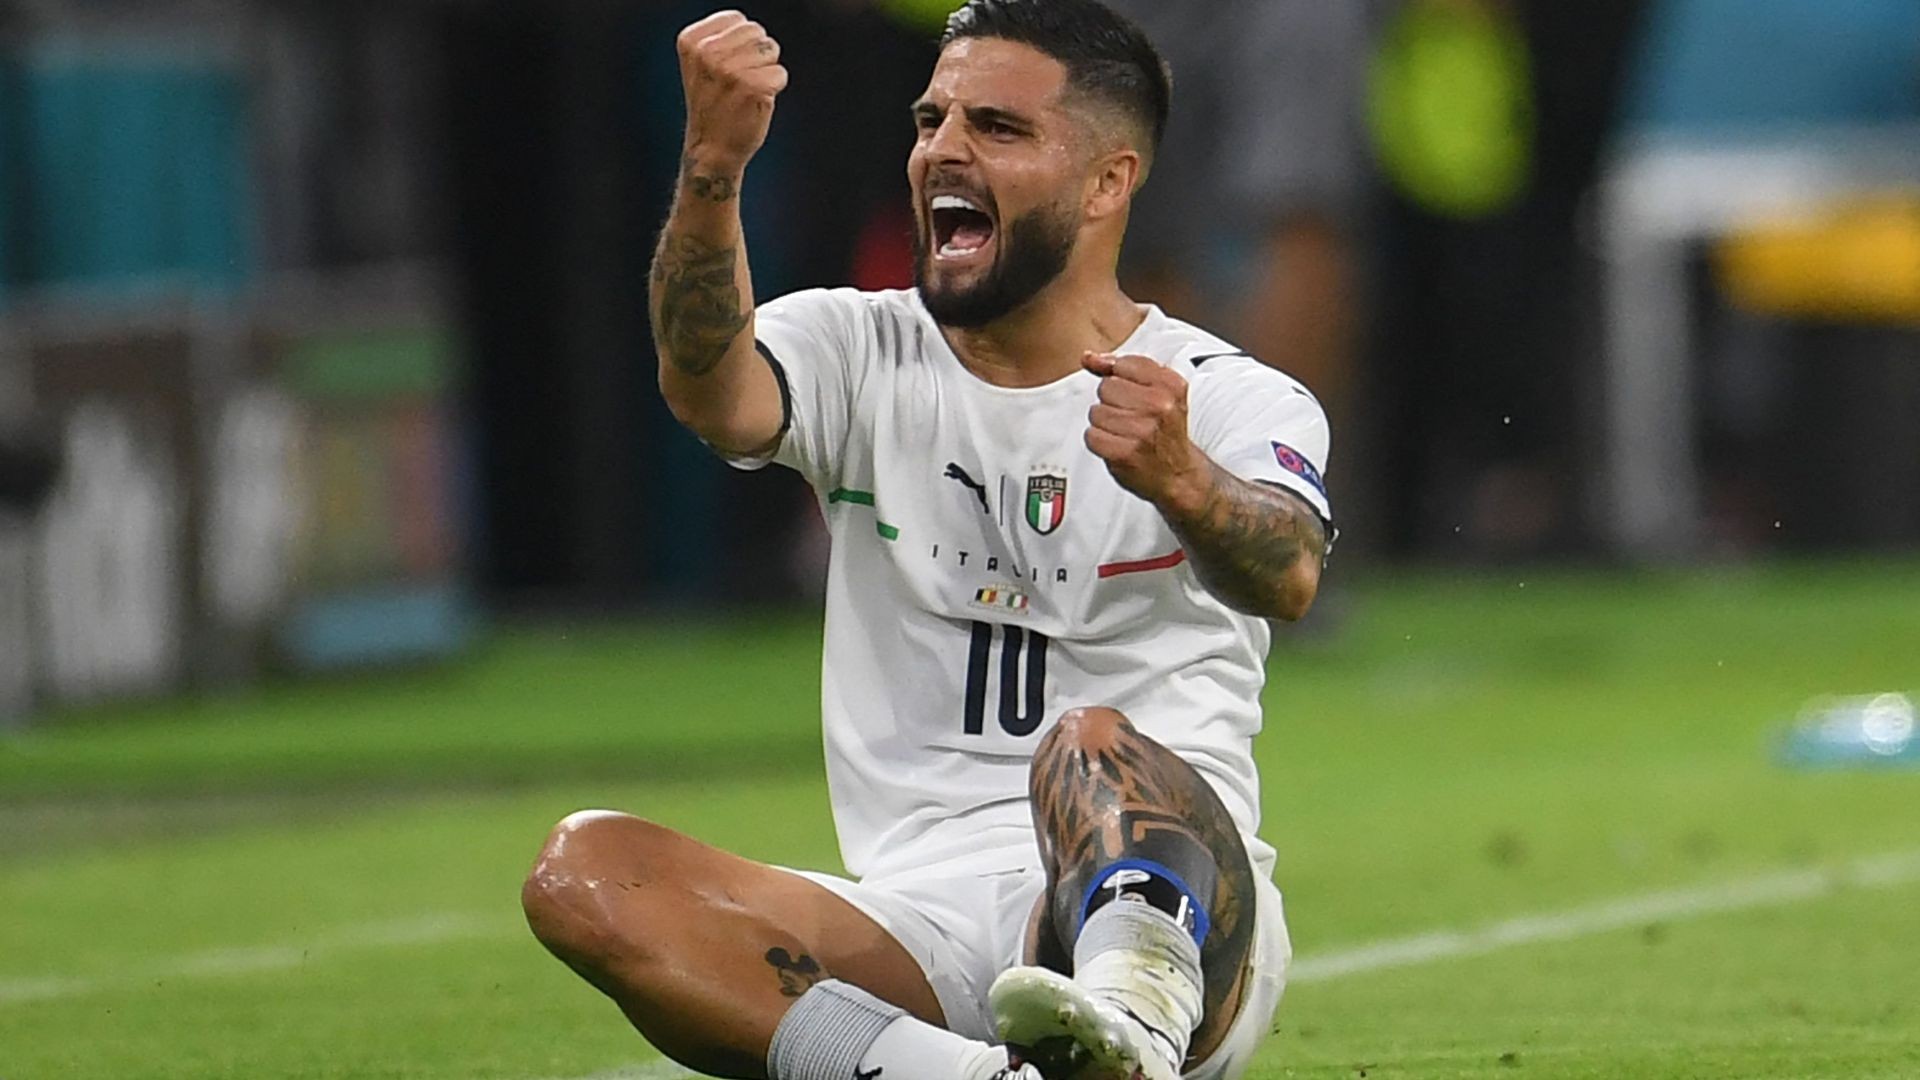 ⁣Insigne Heartwarming Celebration After Scoring for Italy